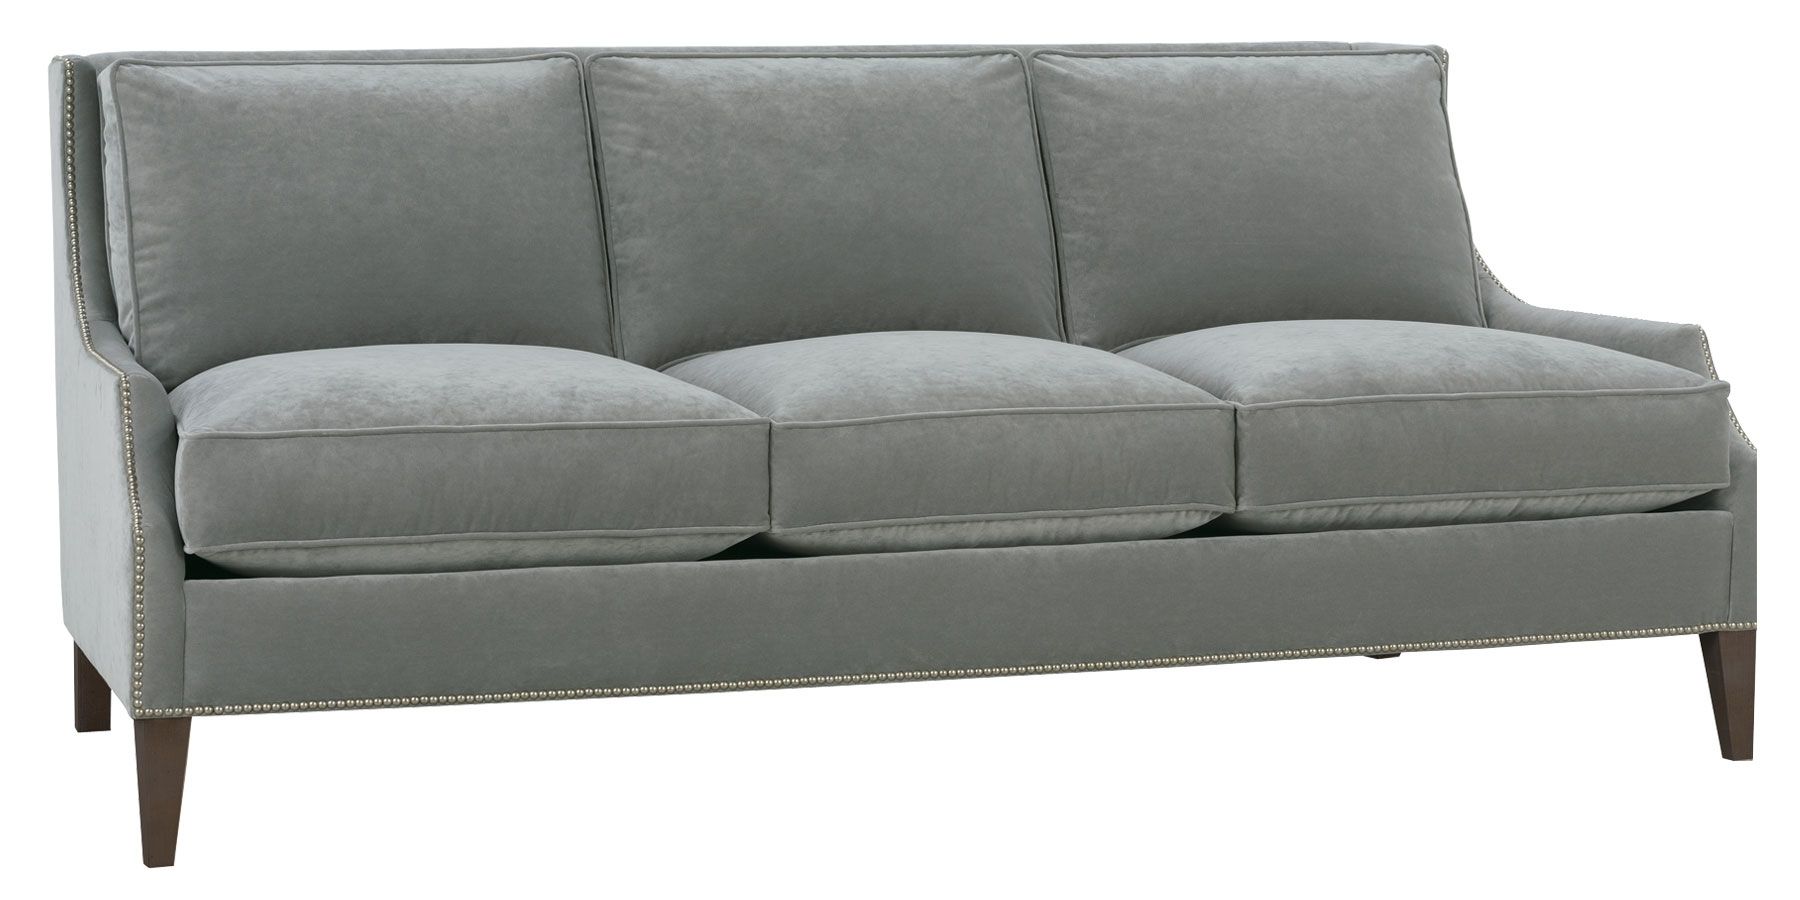 Awesome Apartment Size Sofa 36 About Remodel Office Sofa Ideas With Regarding Apartment Size Sofas (View 1 of 10)